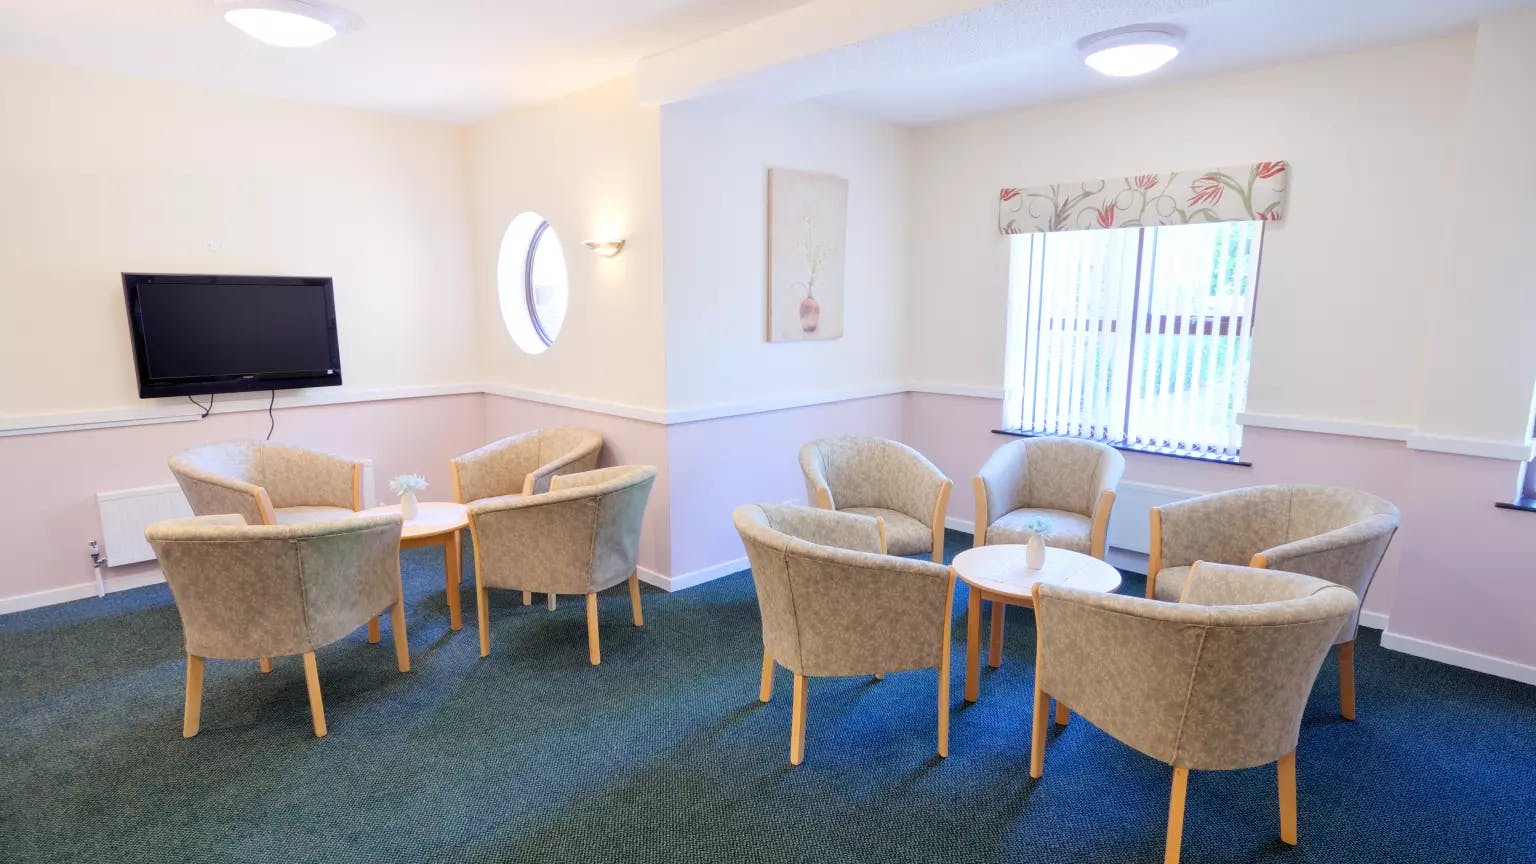 Lounge of Beane River View care home in Hertford, Hertfordshire